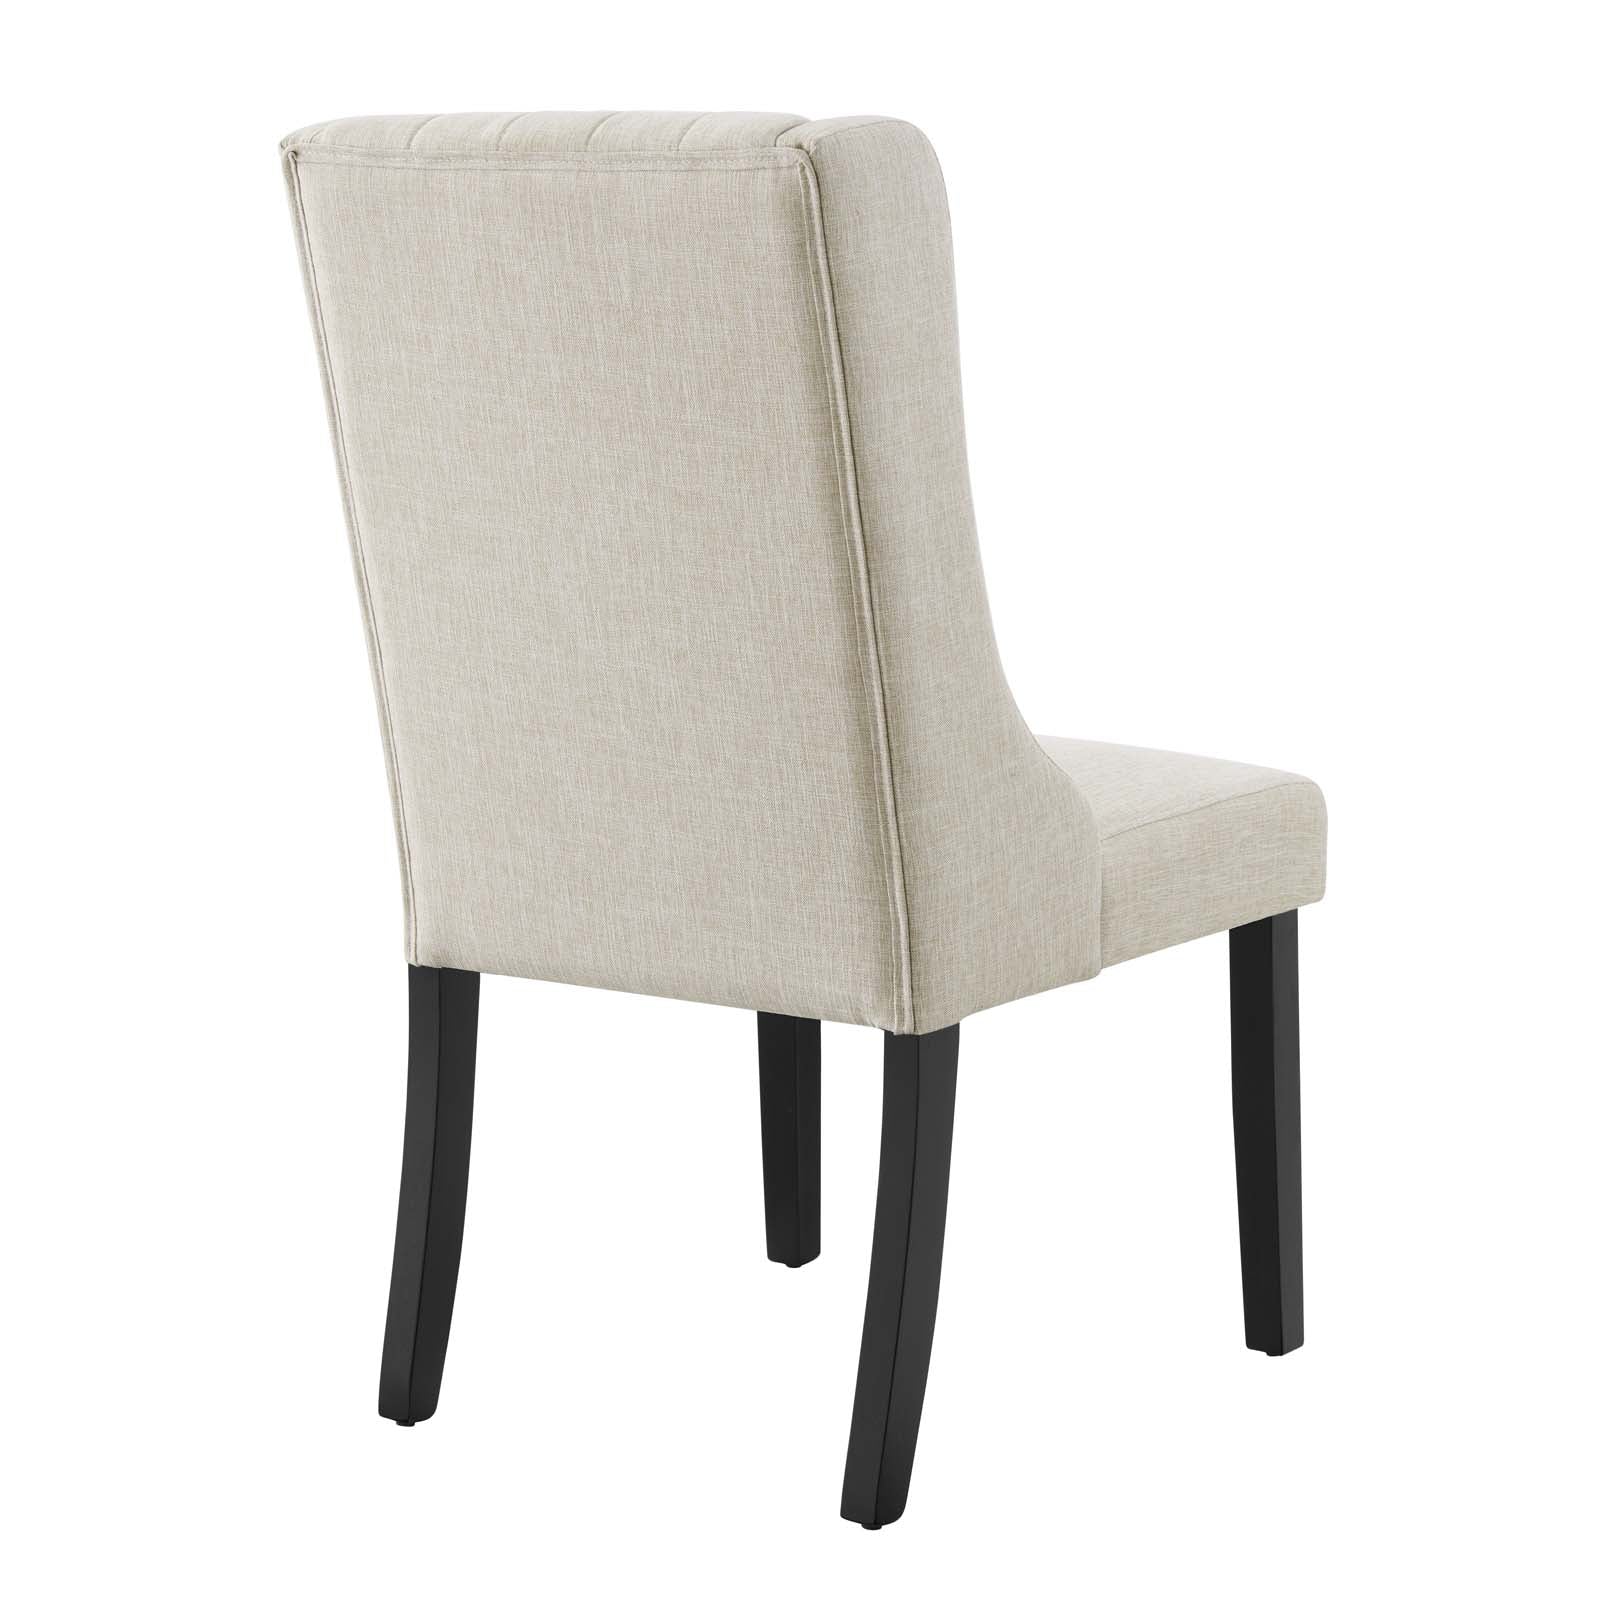 Modway Dining Chairs - Renew Parsons Fabric Dining Side Chairs - Set of 2 Beige